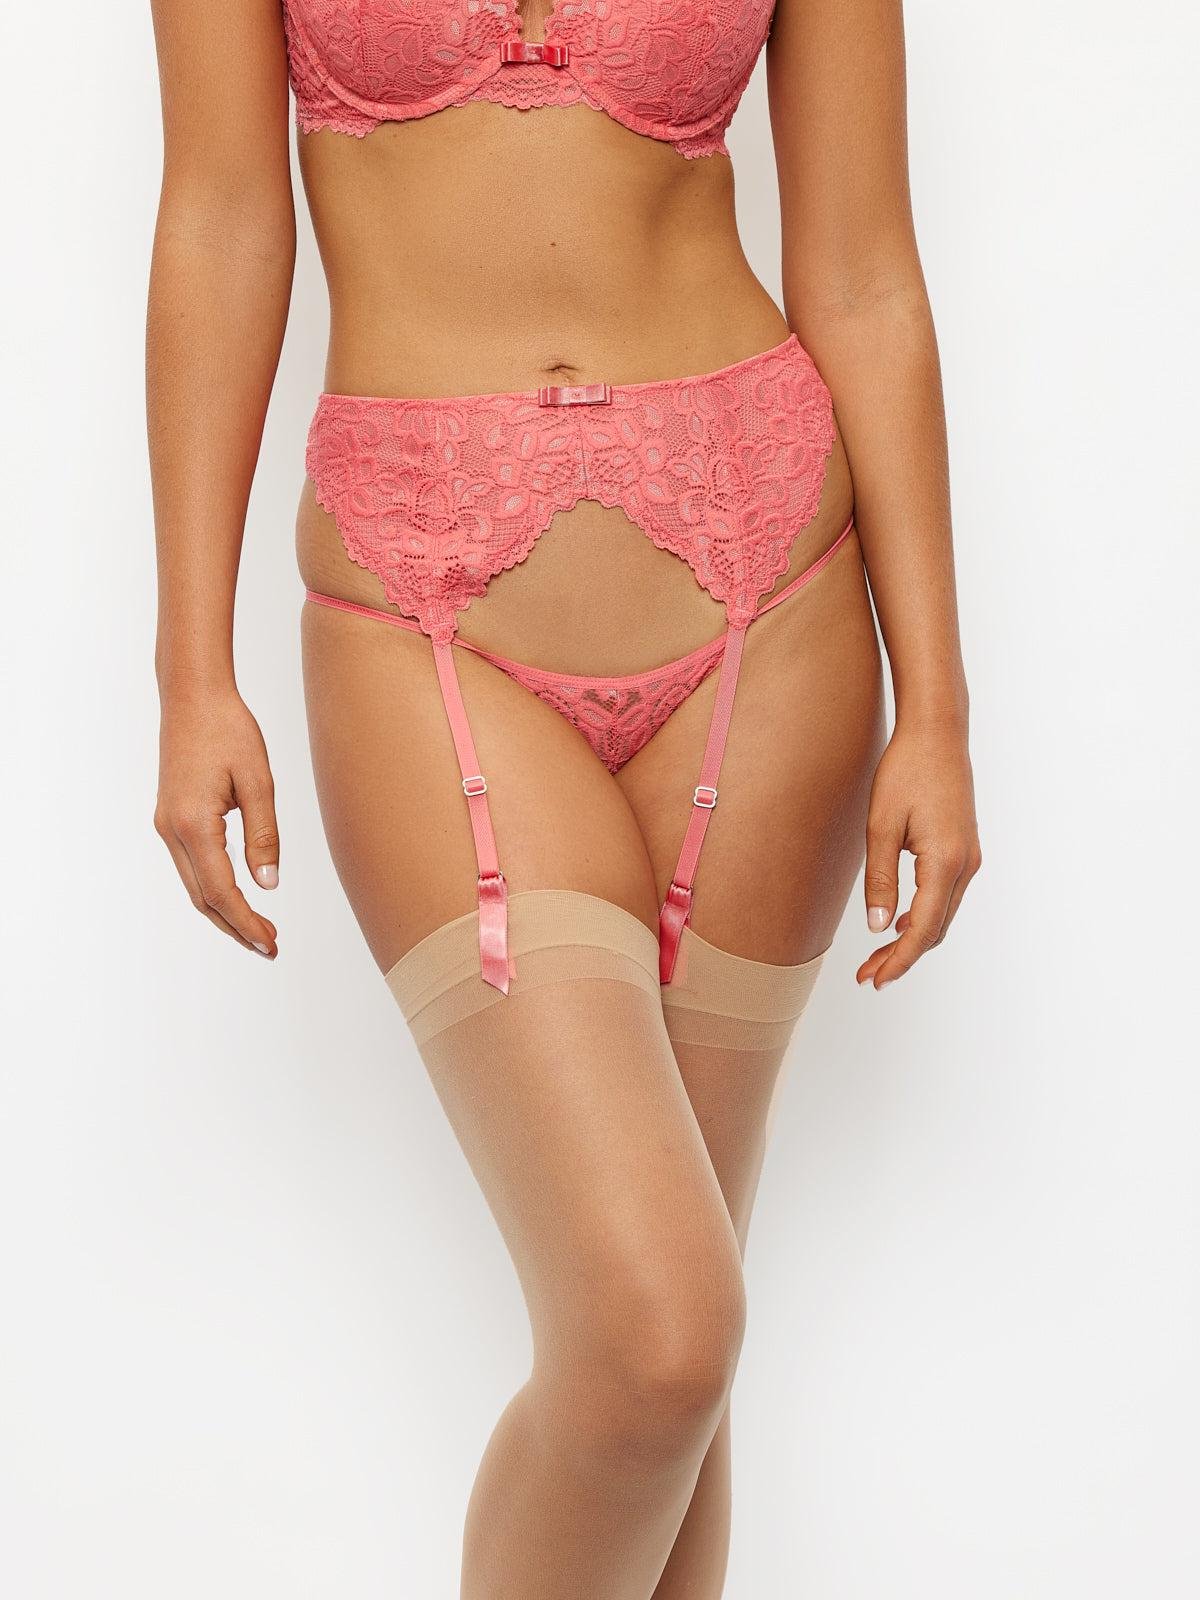 Jessica Lace Garter Belt in Tea Rose/Quartz Pink by FREDERICK'S OF HOLLYWOOD